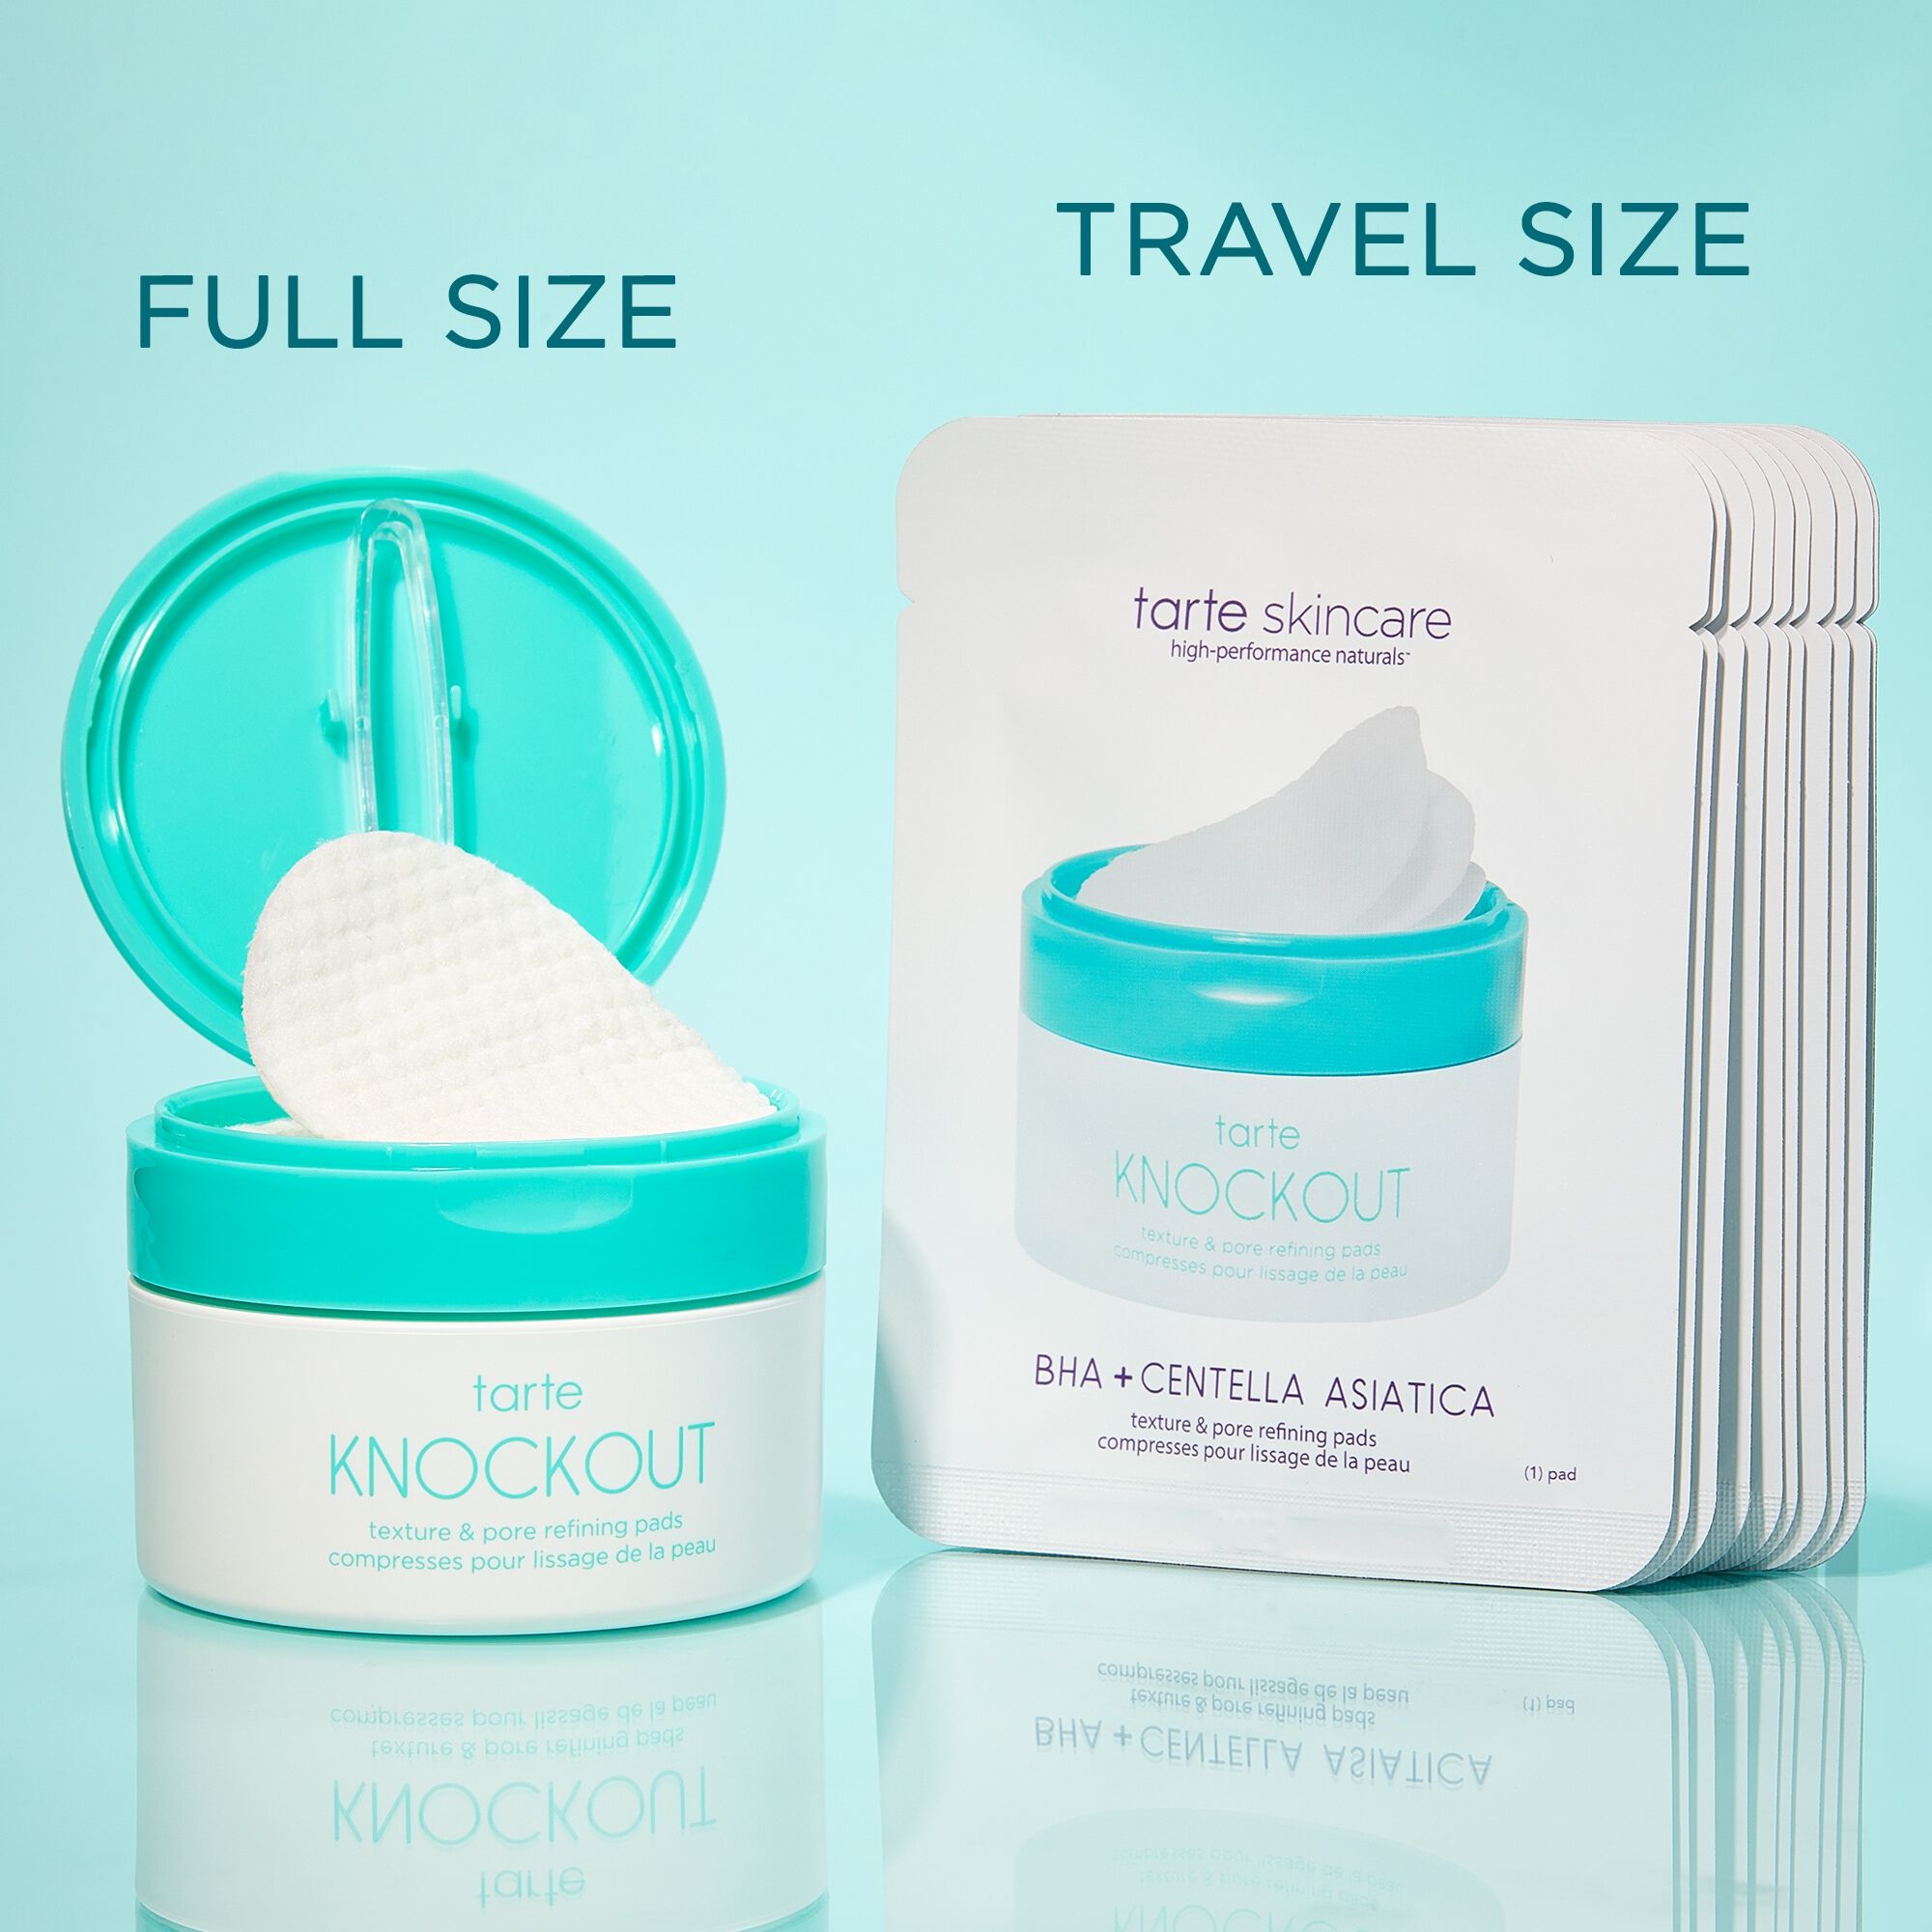 knockout texture & pore refining pads image number null